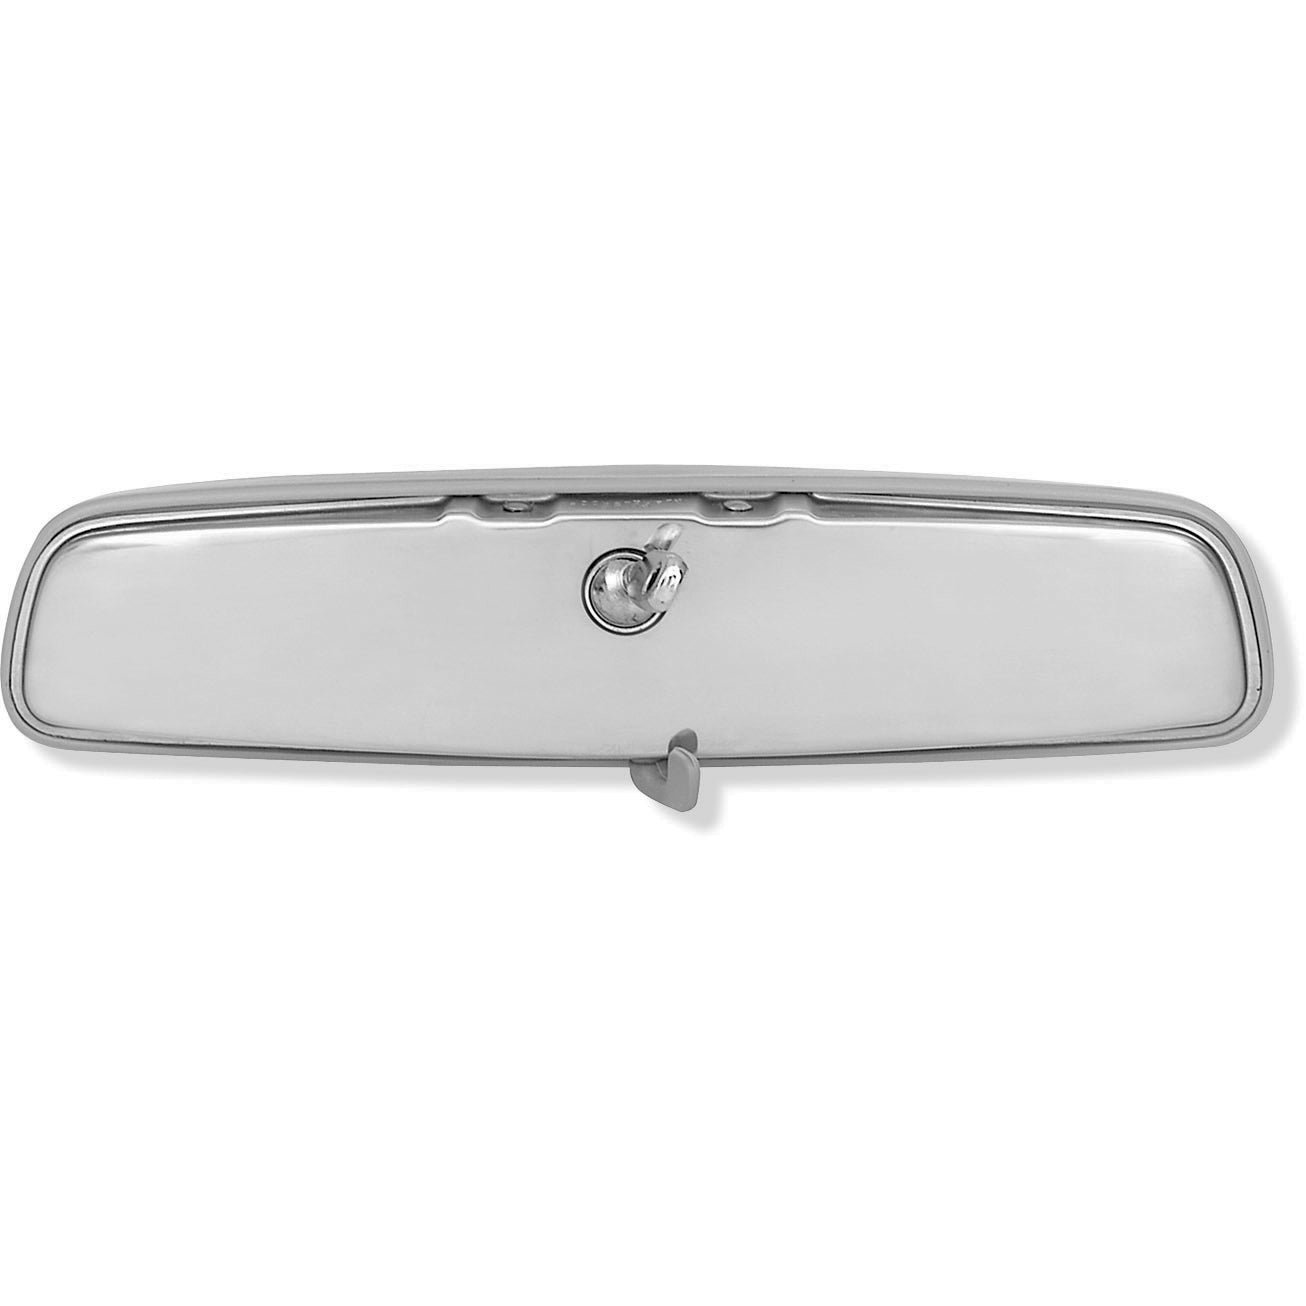 64/72 GM 10" CHROME BACKED REAR VIEW MIRROR